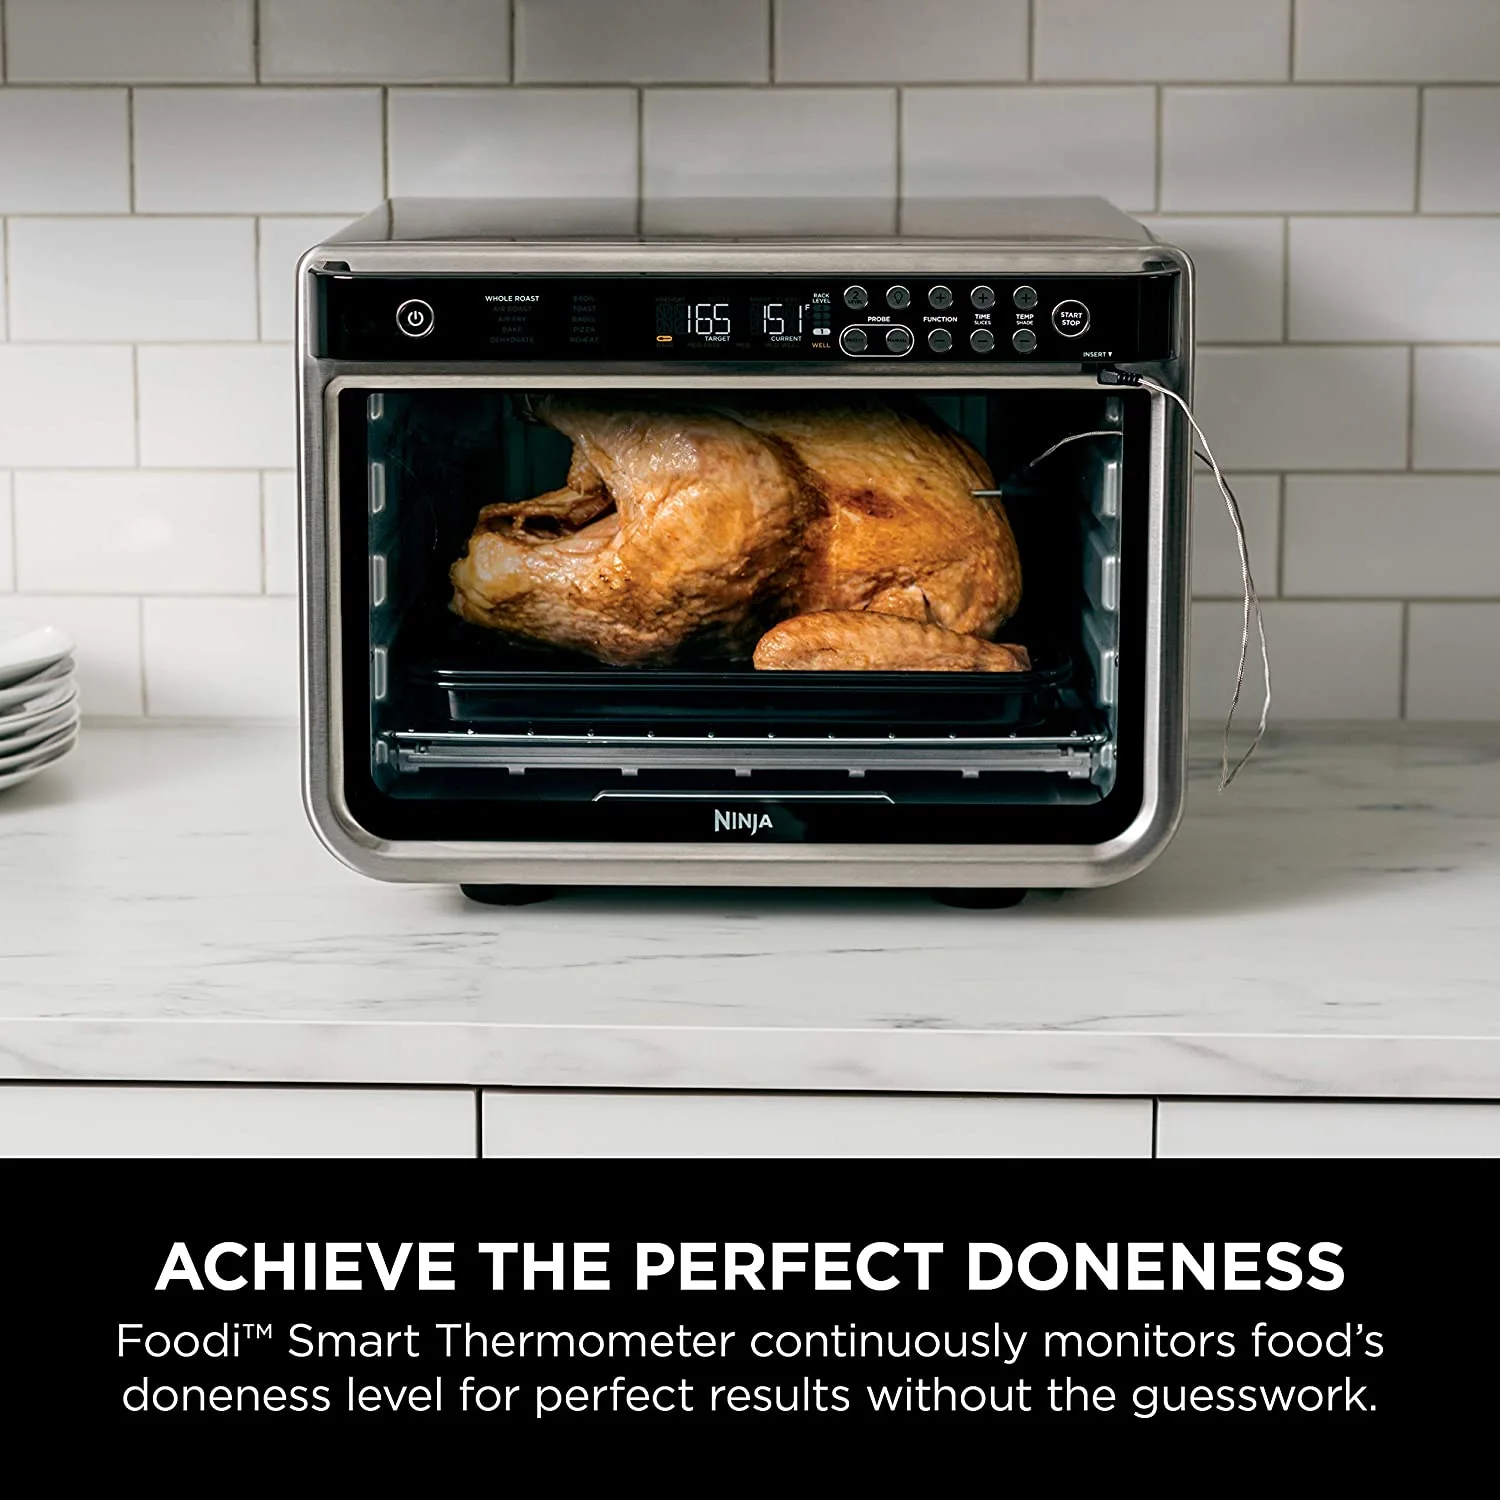 Ninja DT251 Foodi 10-in-1 Smart Air Fry Digital Countertop Convection Toaster Oven with Thermometer XL Capacity and a Stainless Steel Finish